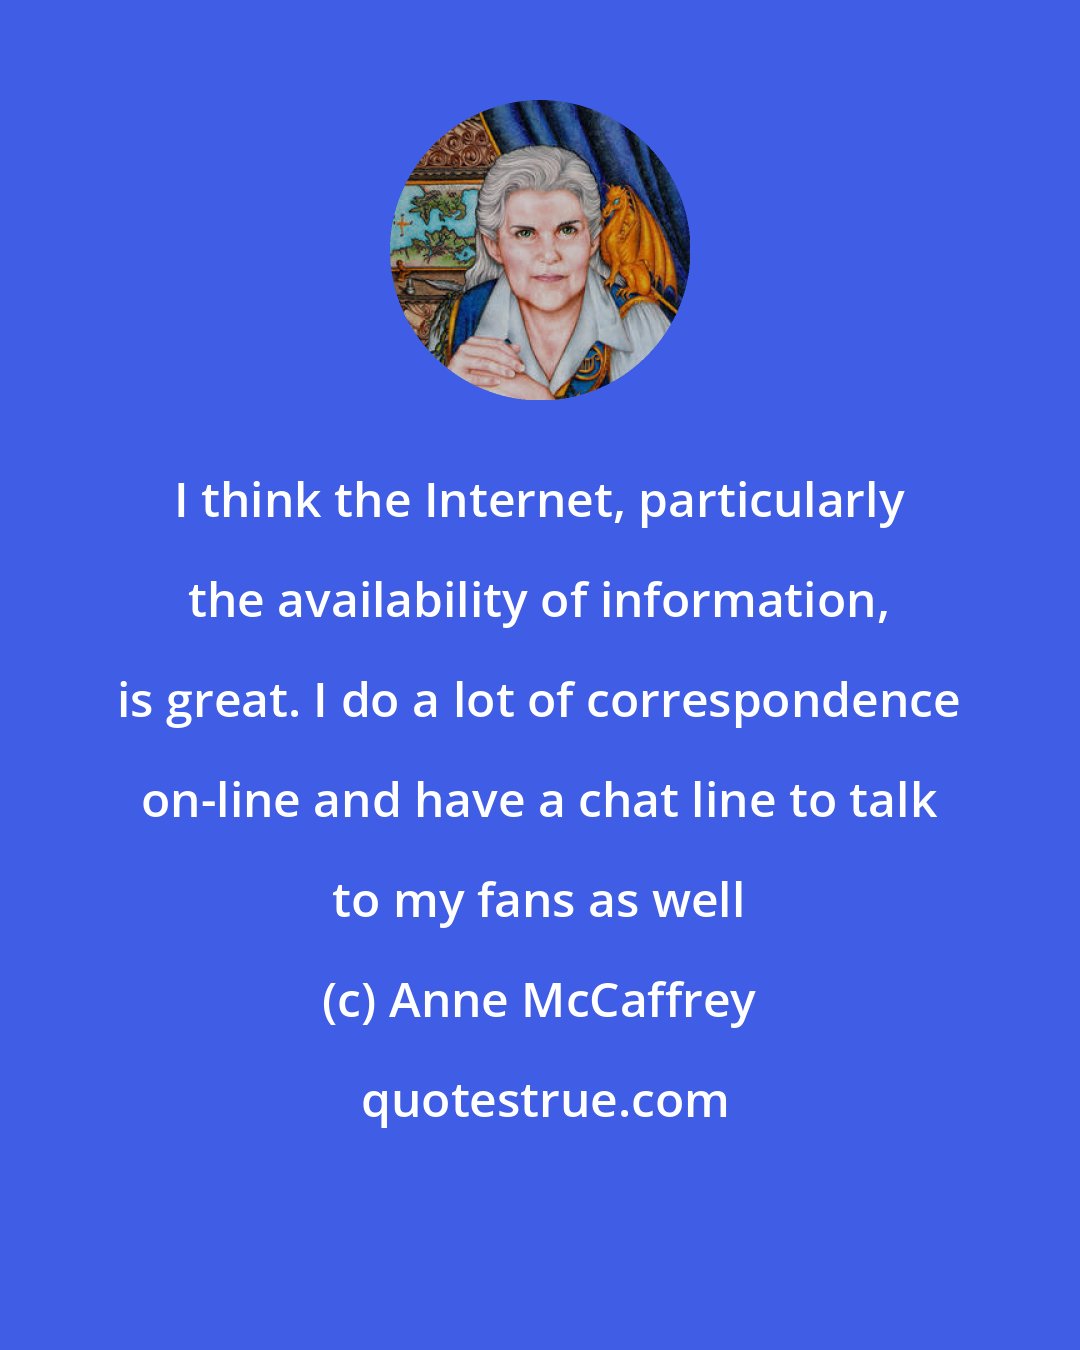 Anne McCaffrey: I think the Internet, particularly the availability of information, is great. I do a lot of correspondence on-line and have a chat line to talk to my fans as well